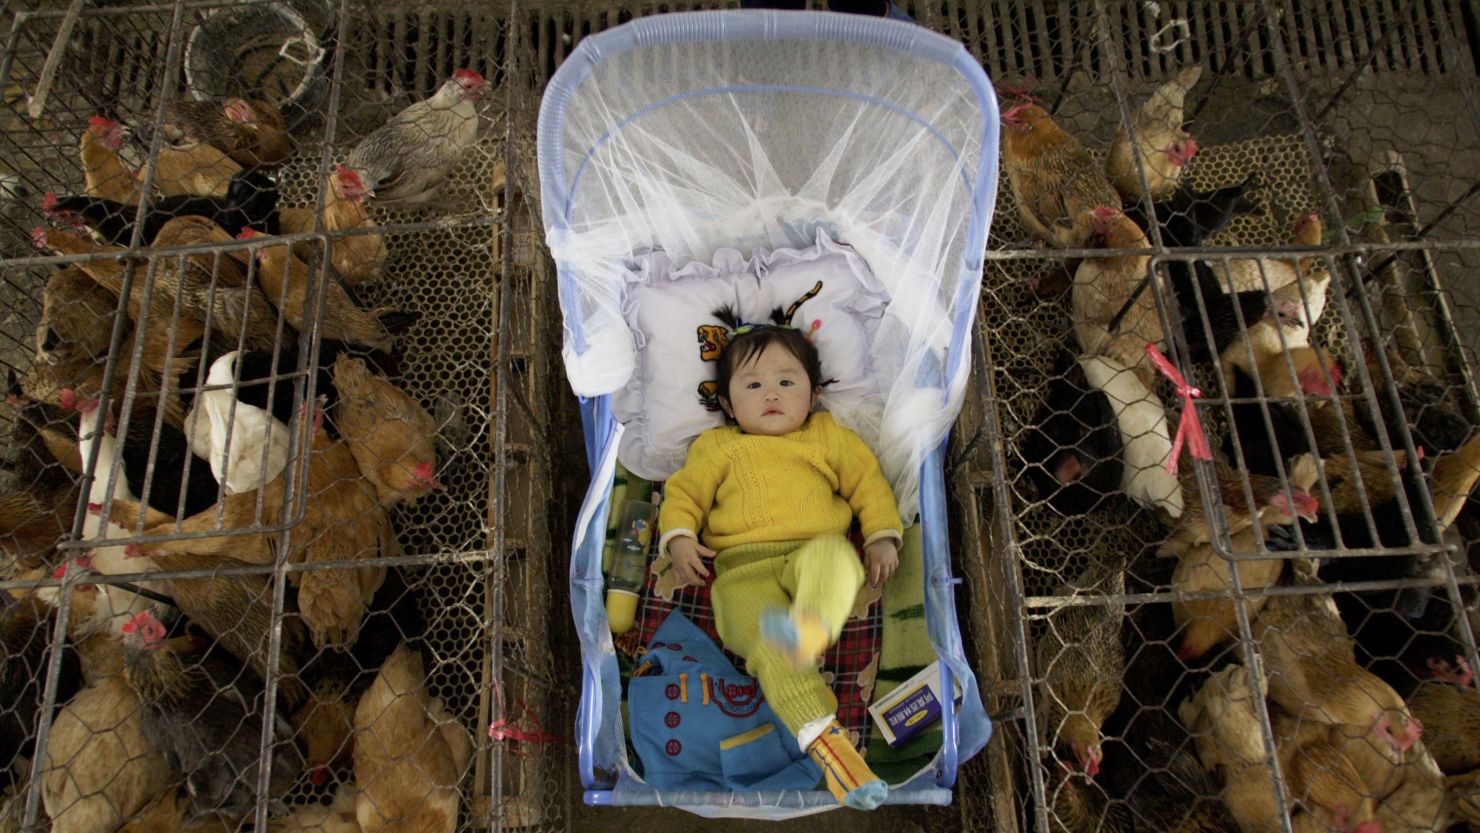 A vendor's child is placed between poultry cages in Wuhan, China, in this file picture 